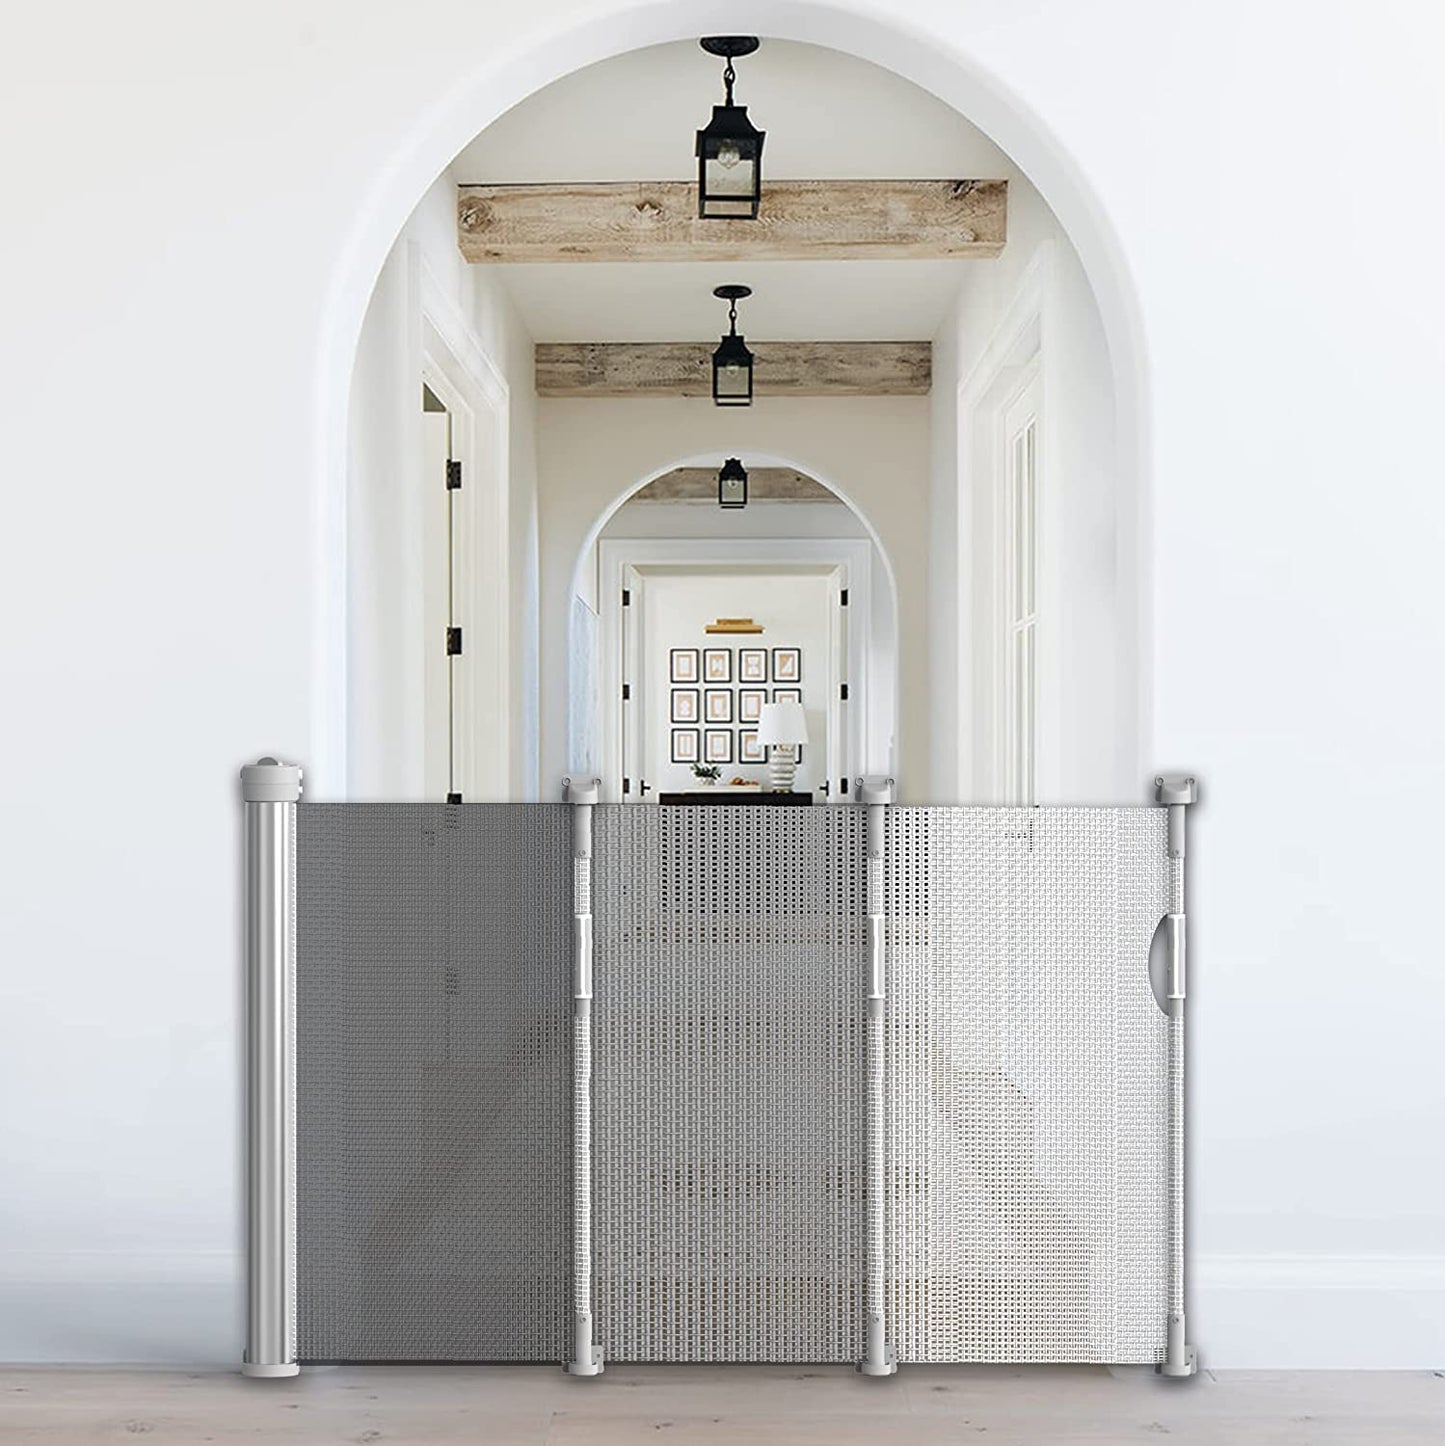 Retractable Baby & Pet Safety Gate